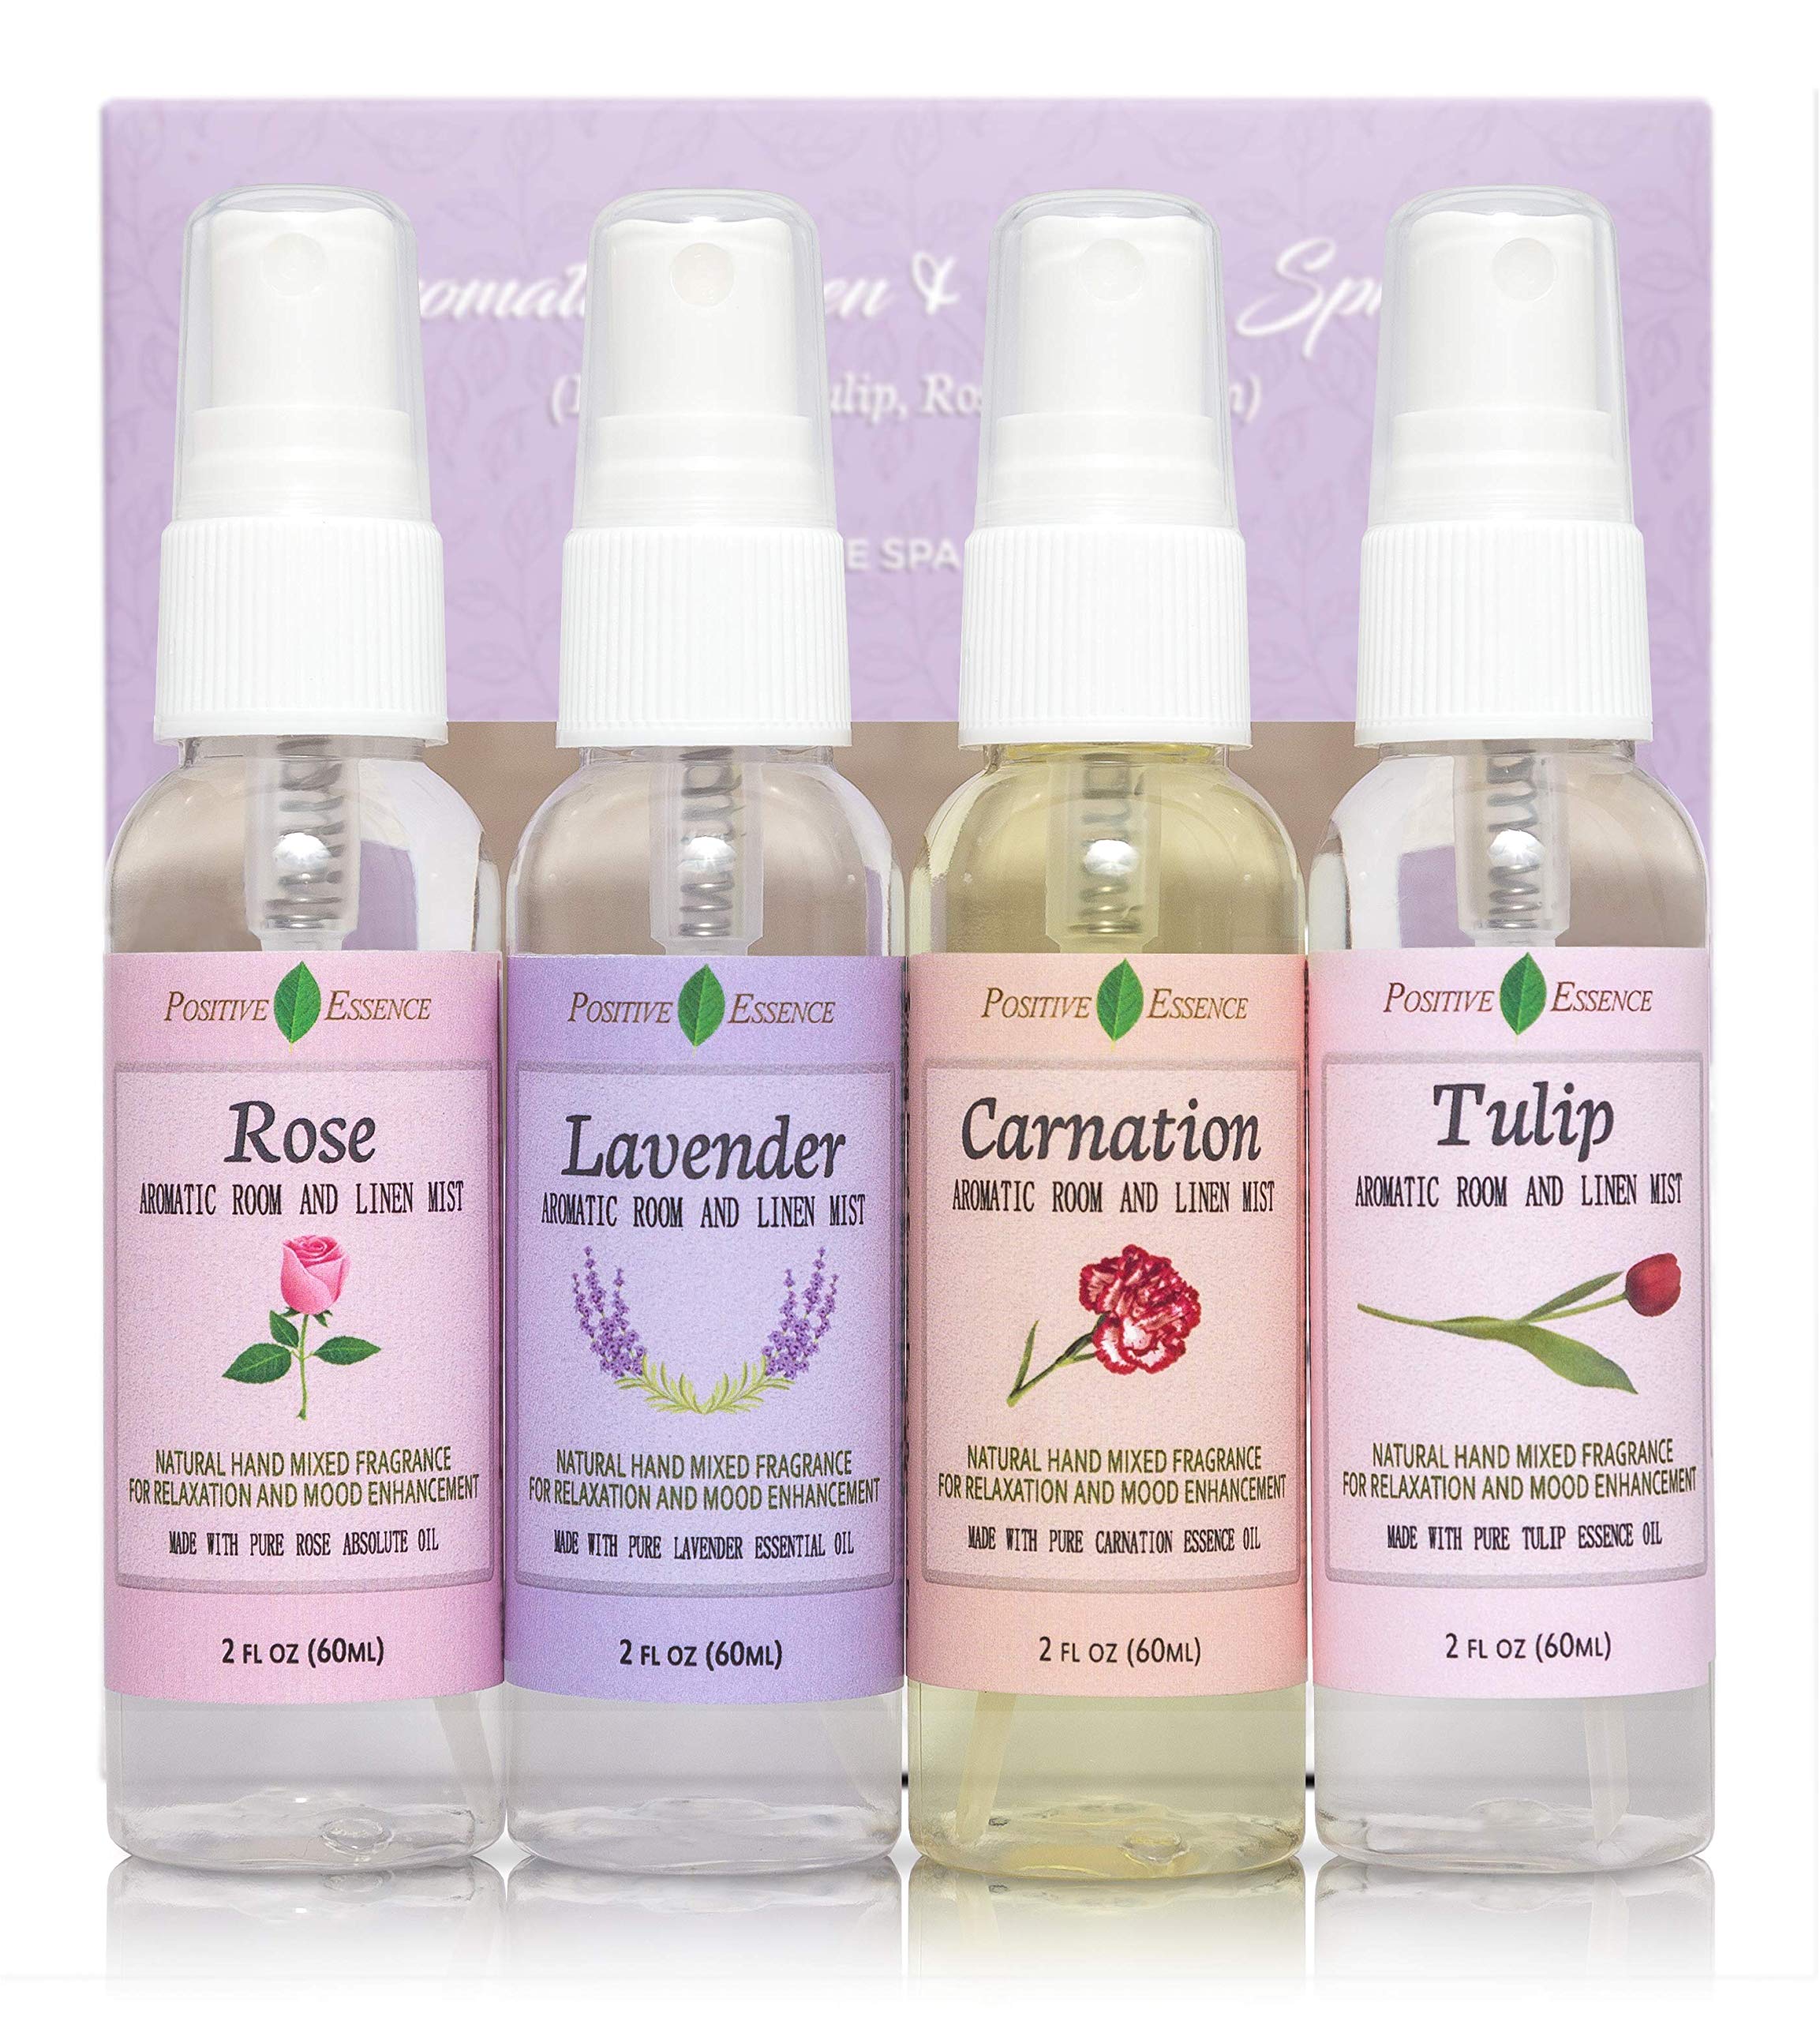 Positive Essence Linen and Room Spray Floral gift Set, 4-Pack 60 mL (Lavender, carnation, Rose, & Tulip) Natural Pillow Sprays Made with Pure Ess